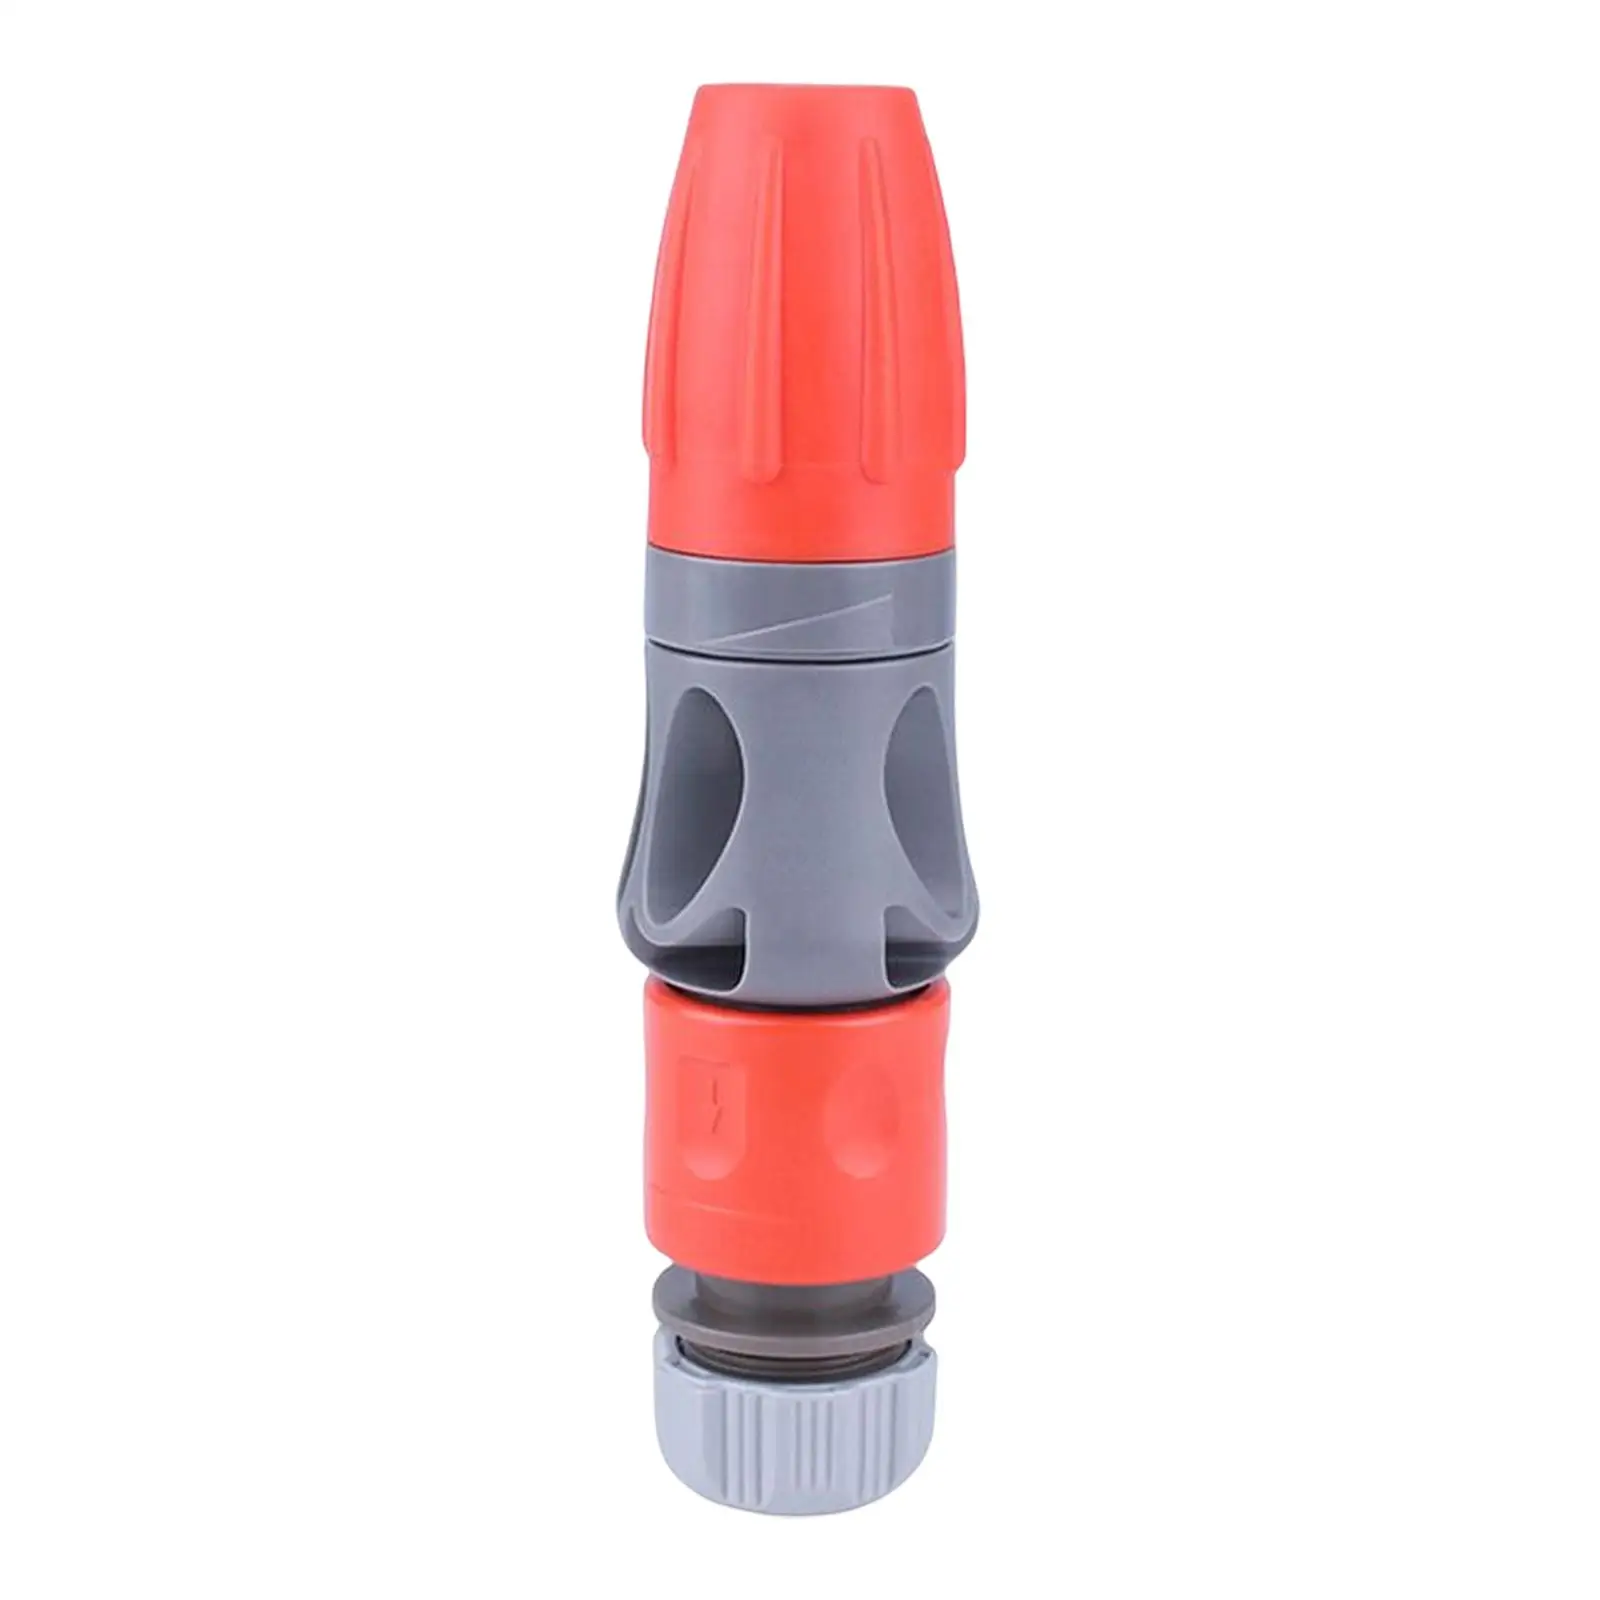 

Professional Water Hose Nozzle Attachments Nonslip Manual Washer Tips for Sprayer House Cleaning Garden Watering